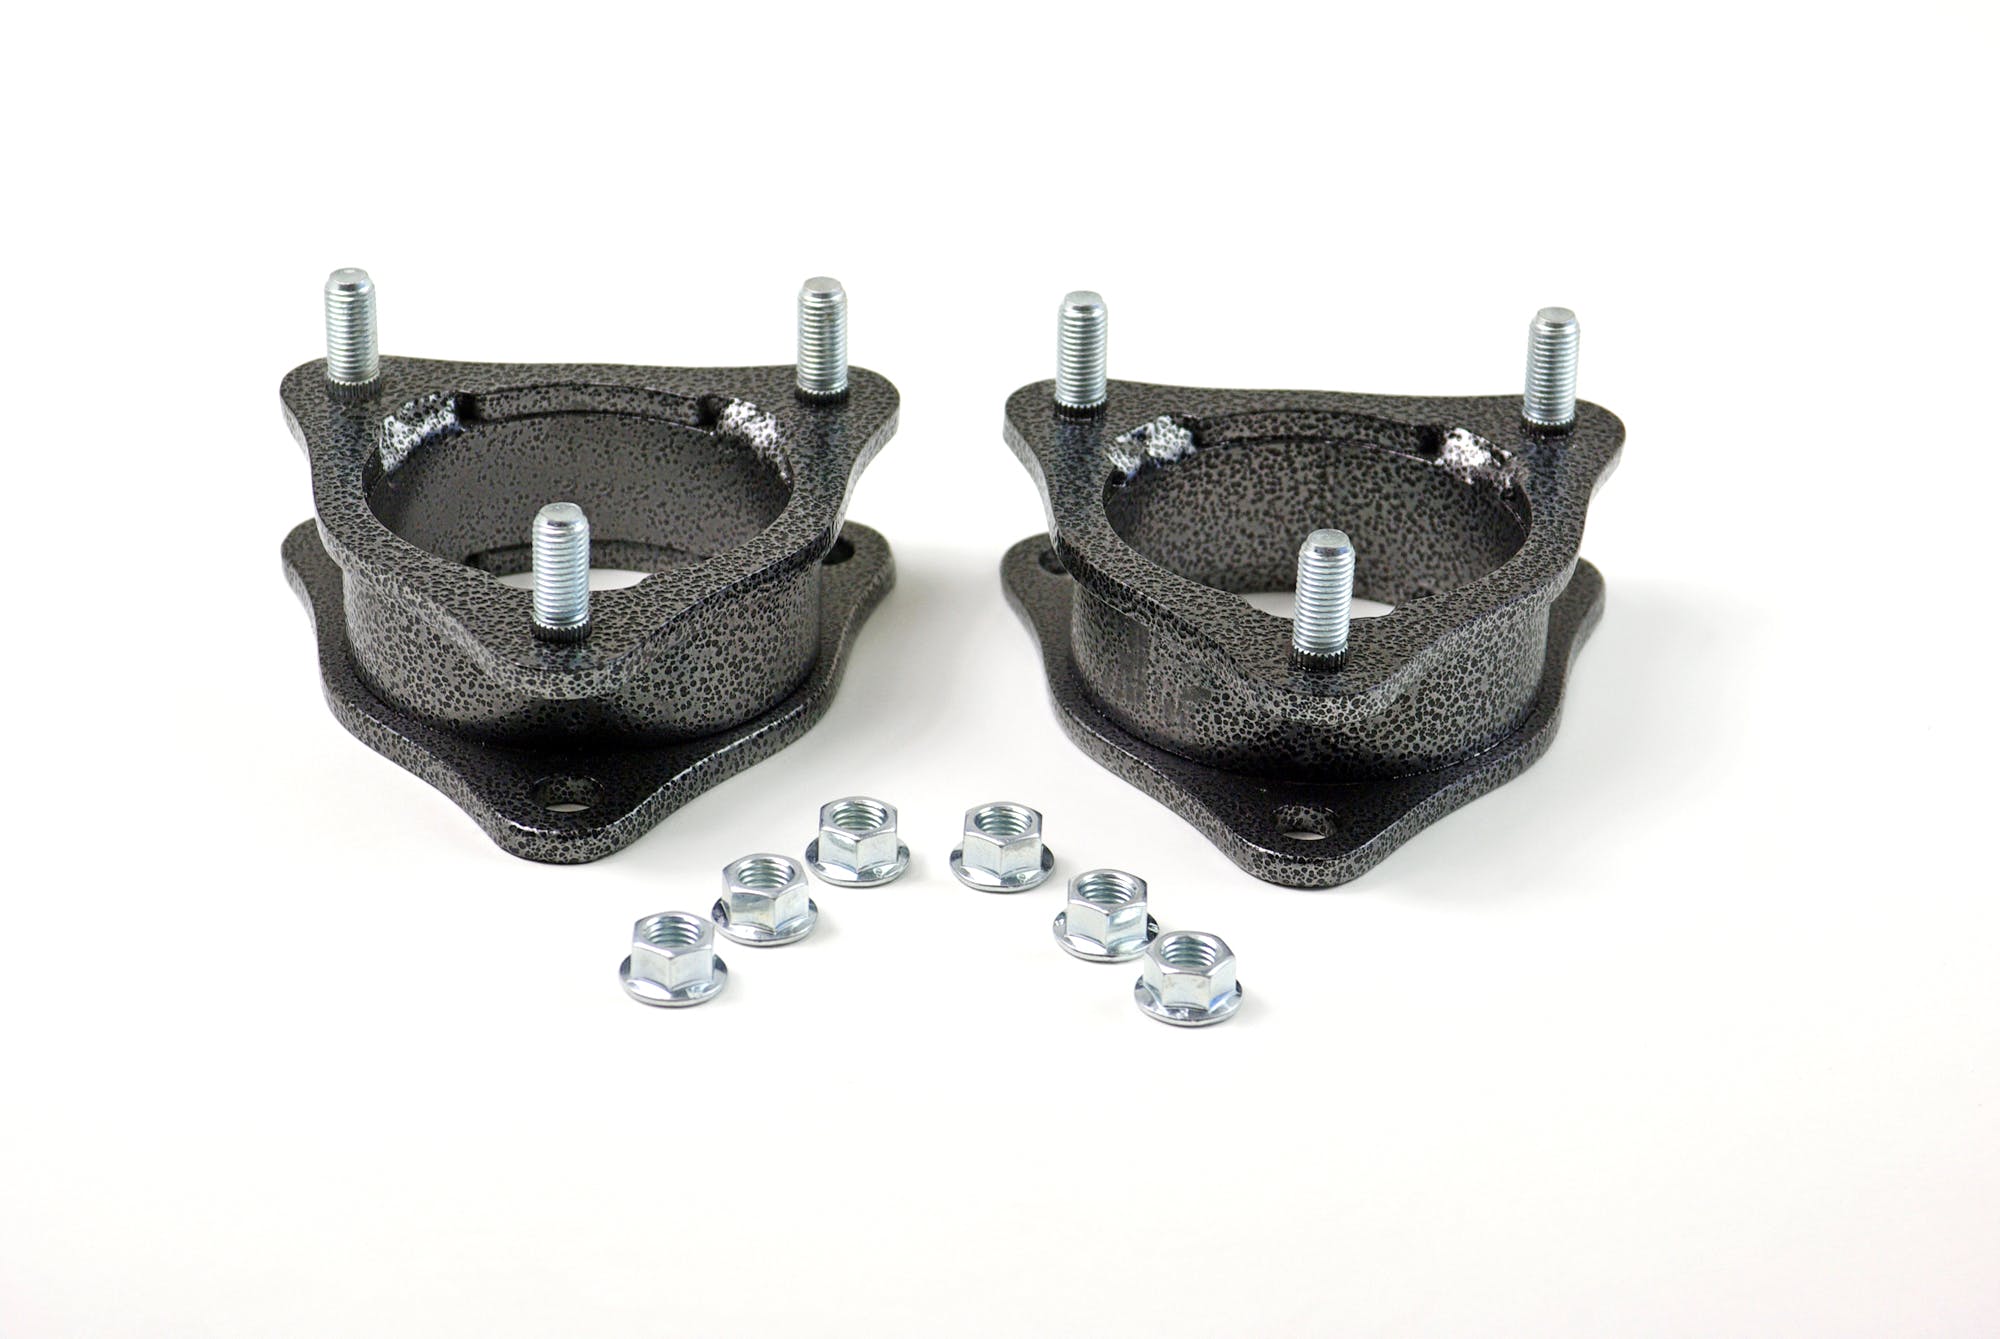 Rugged Off Road 5-101 Suspension Leveling Kit